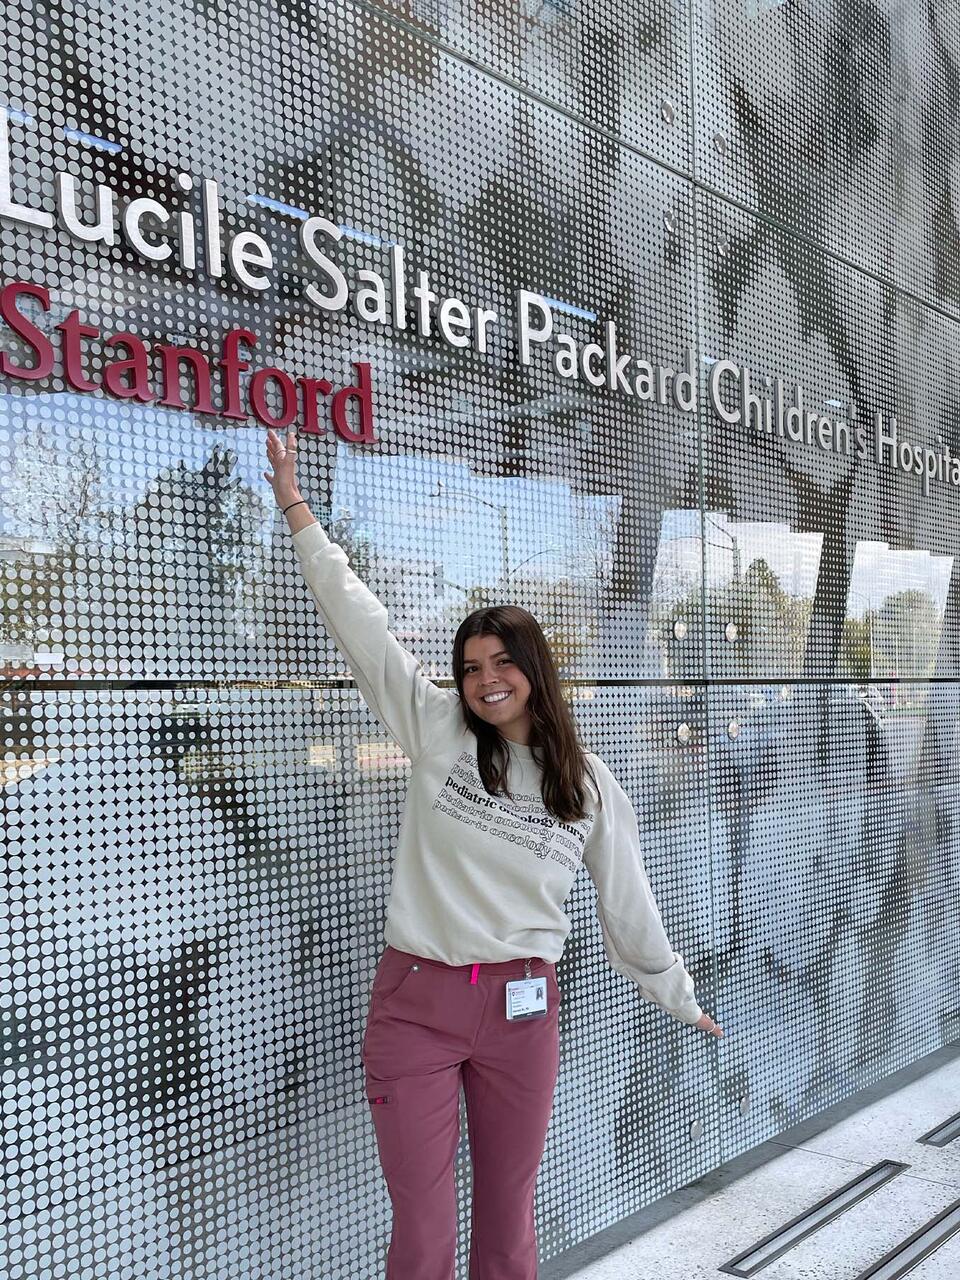 Hannah McCullough in front of Stanford Lucile Salter Packard sign